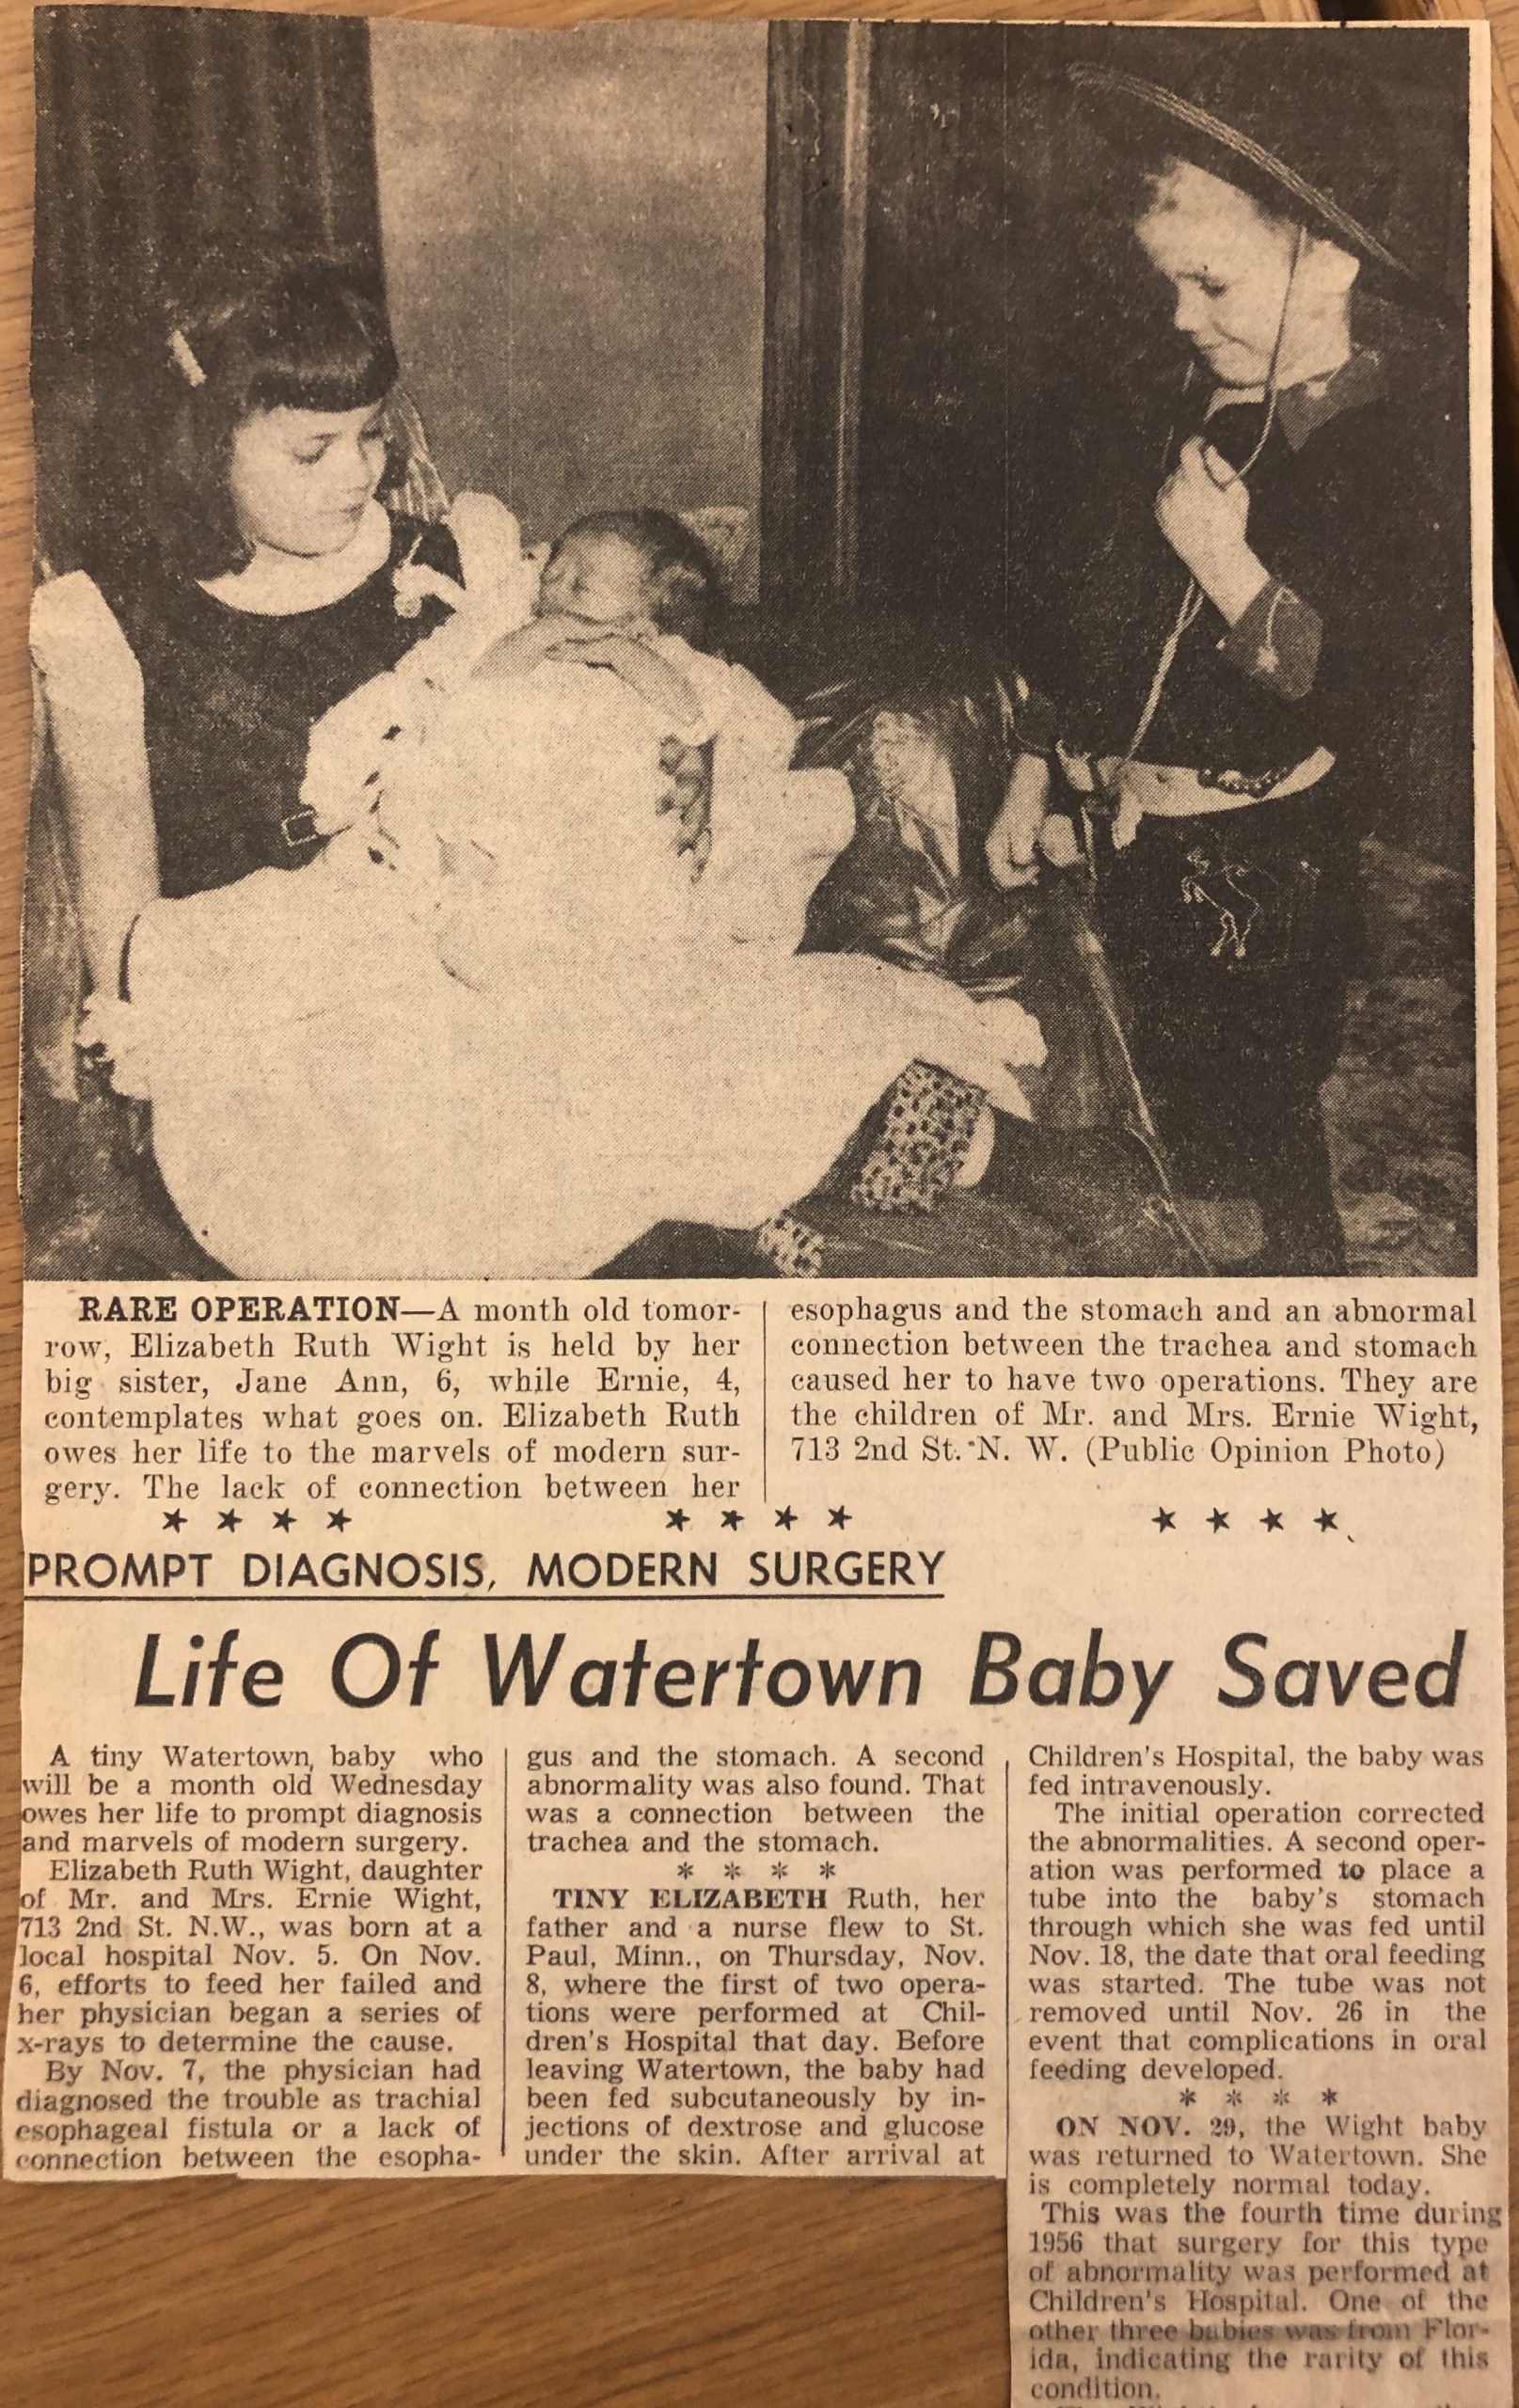 Newspaper article from the 1950s